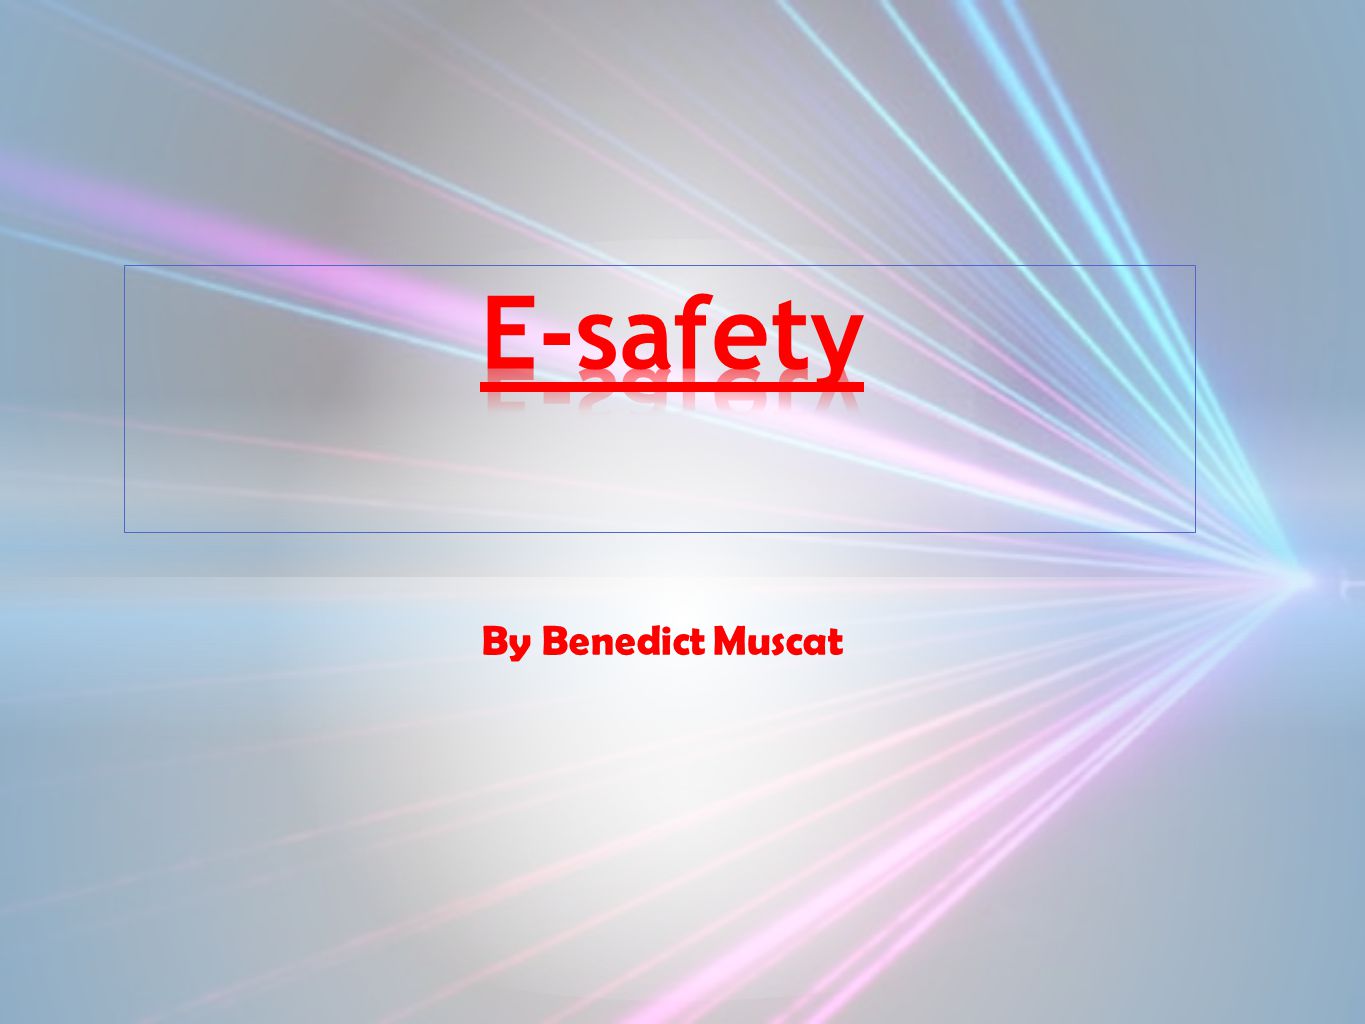 E-safety By Benedict Muscat